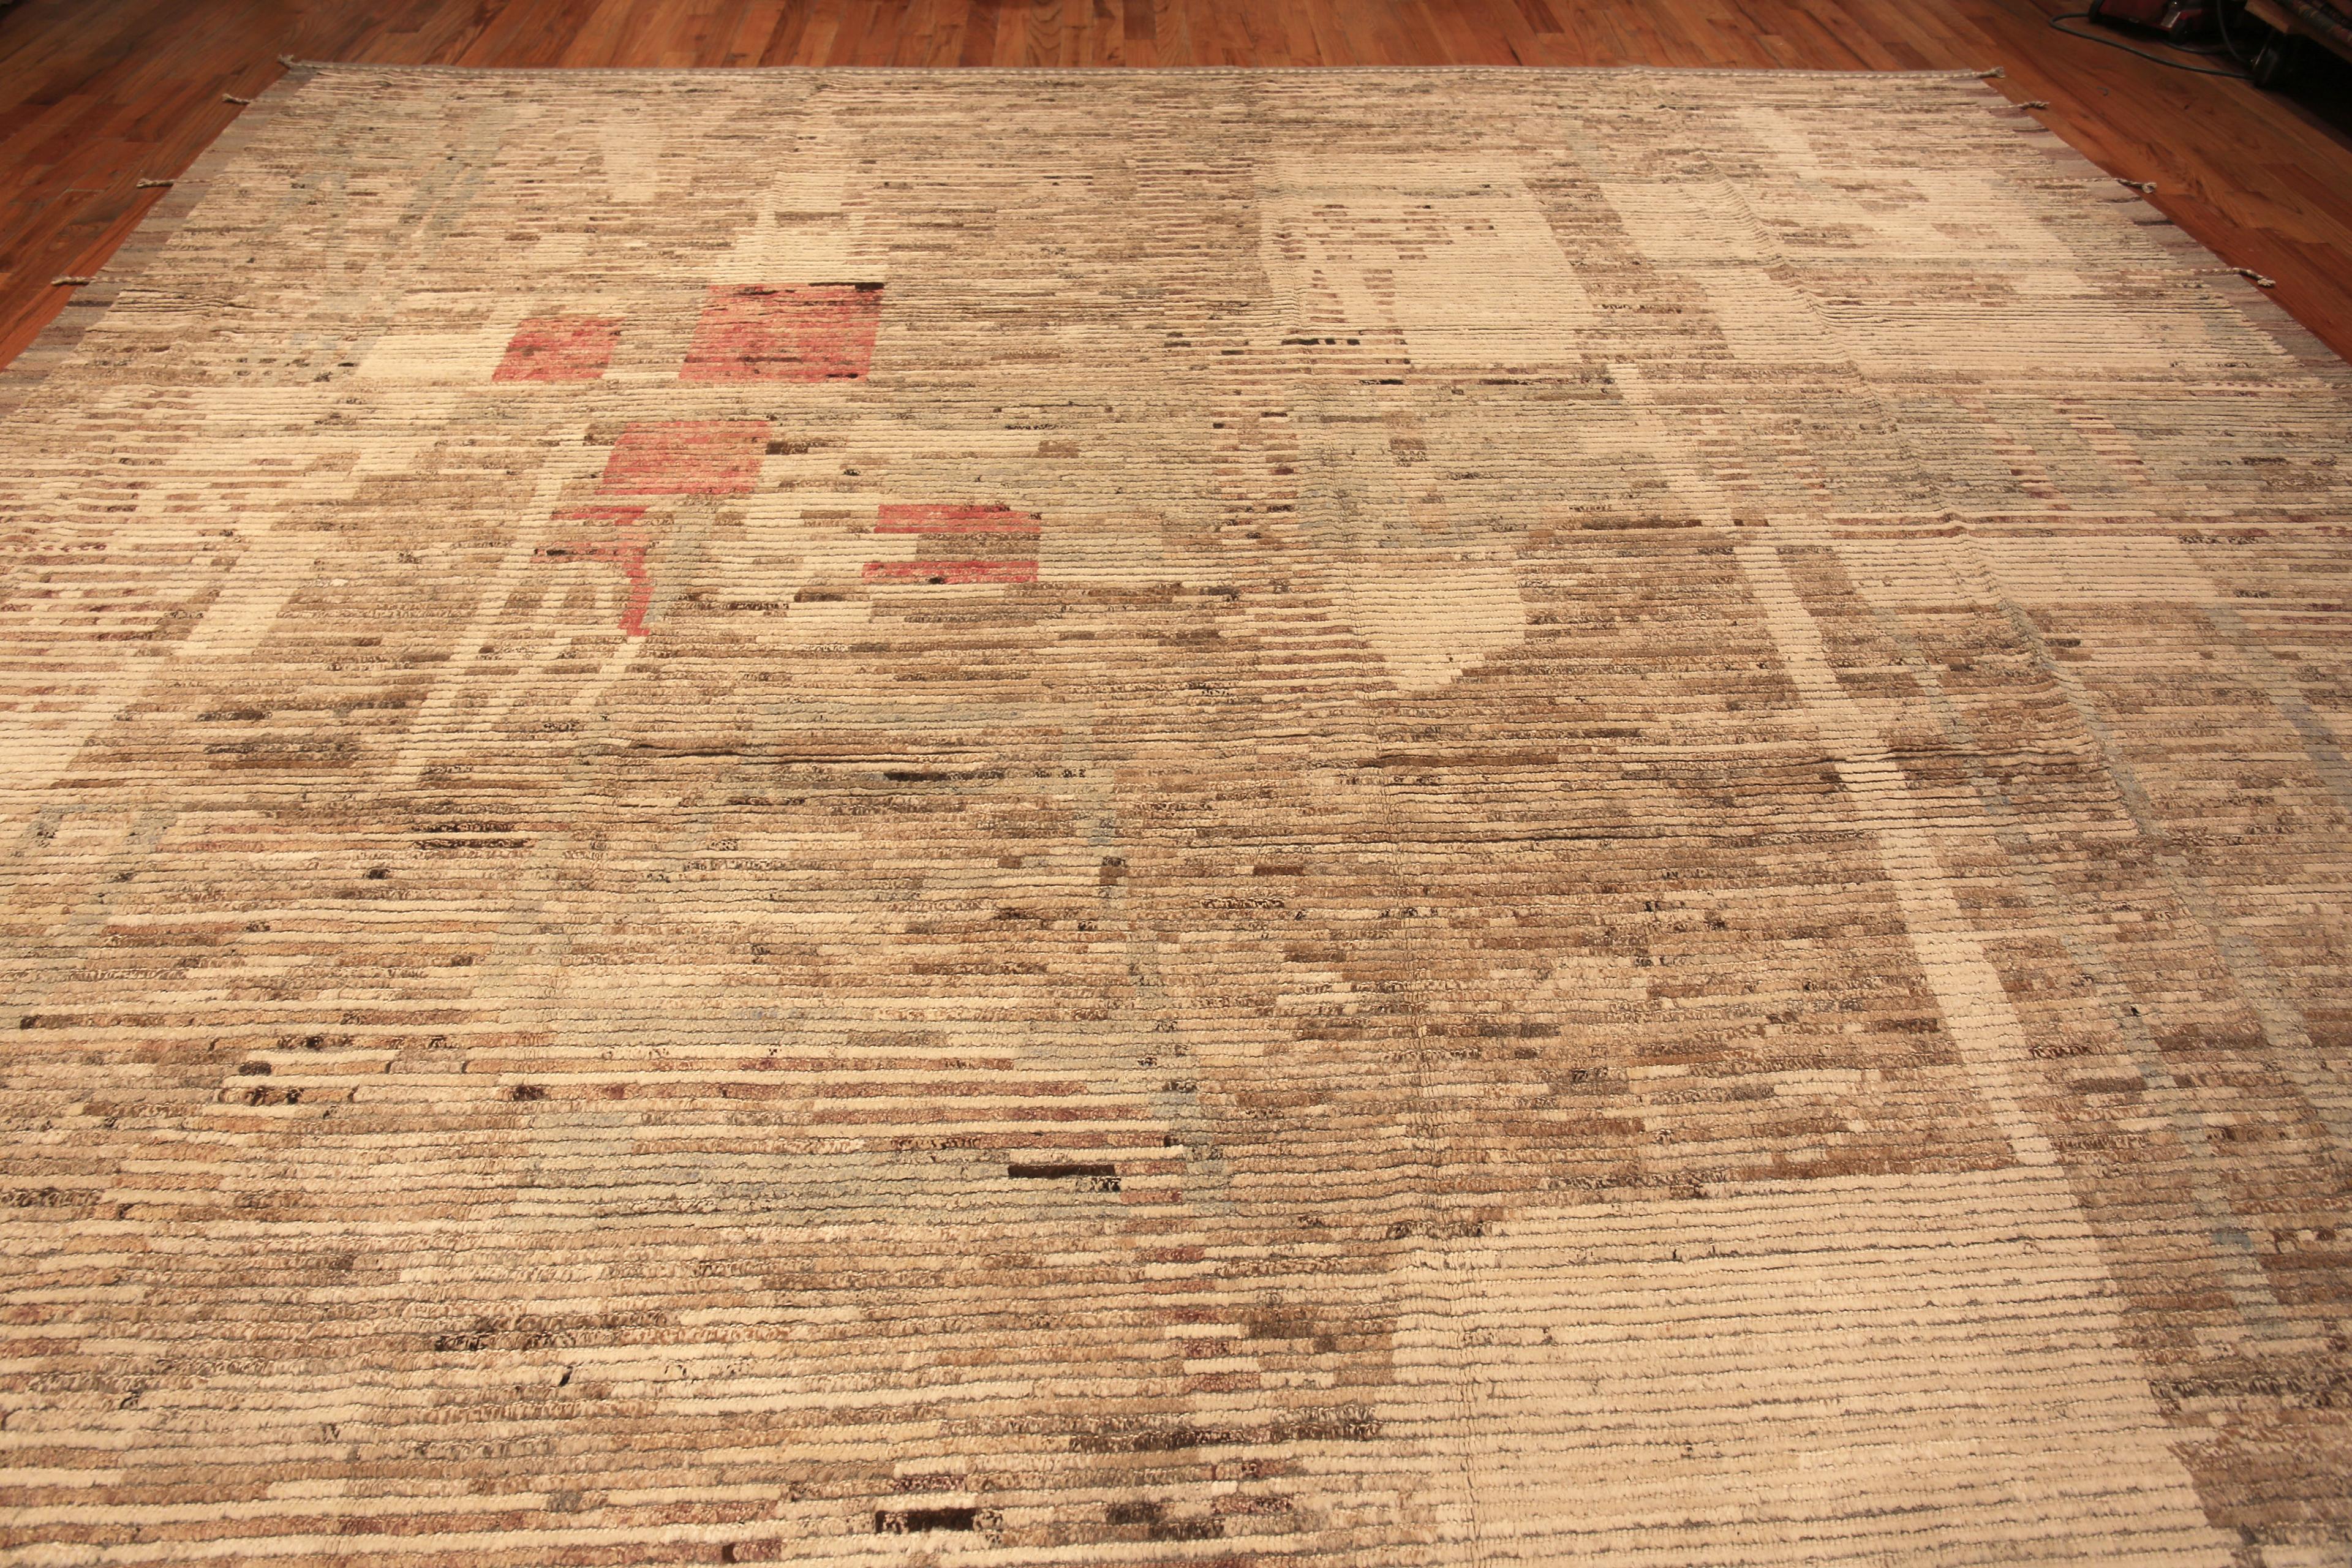 Hand-Knotted Nazmiyal Collection Large Earthy Tones Trendy Modern Rug 14' x 16'6